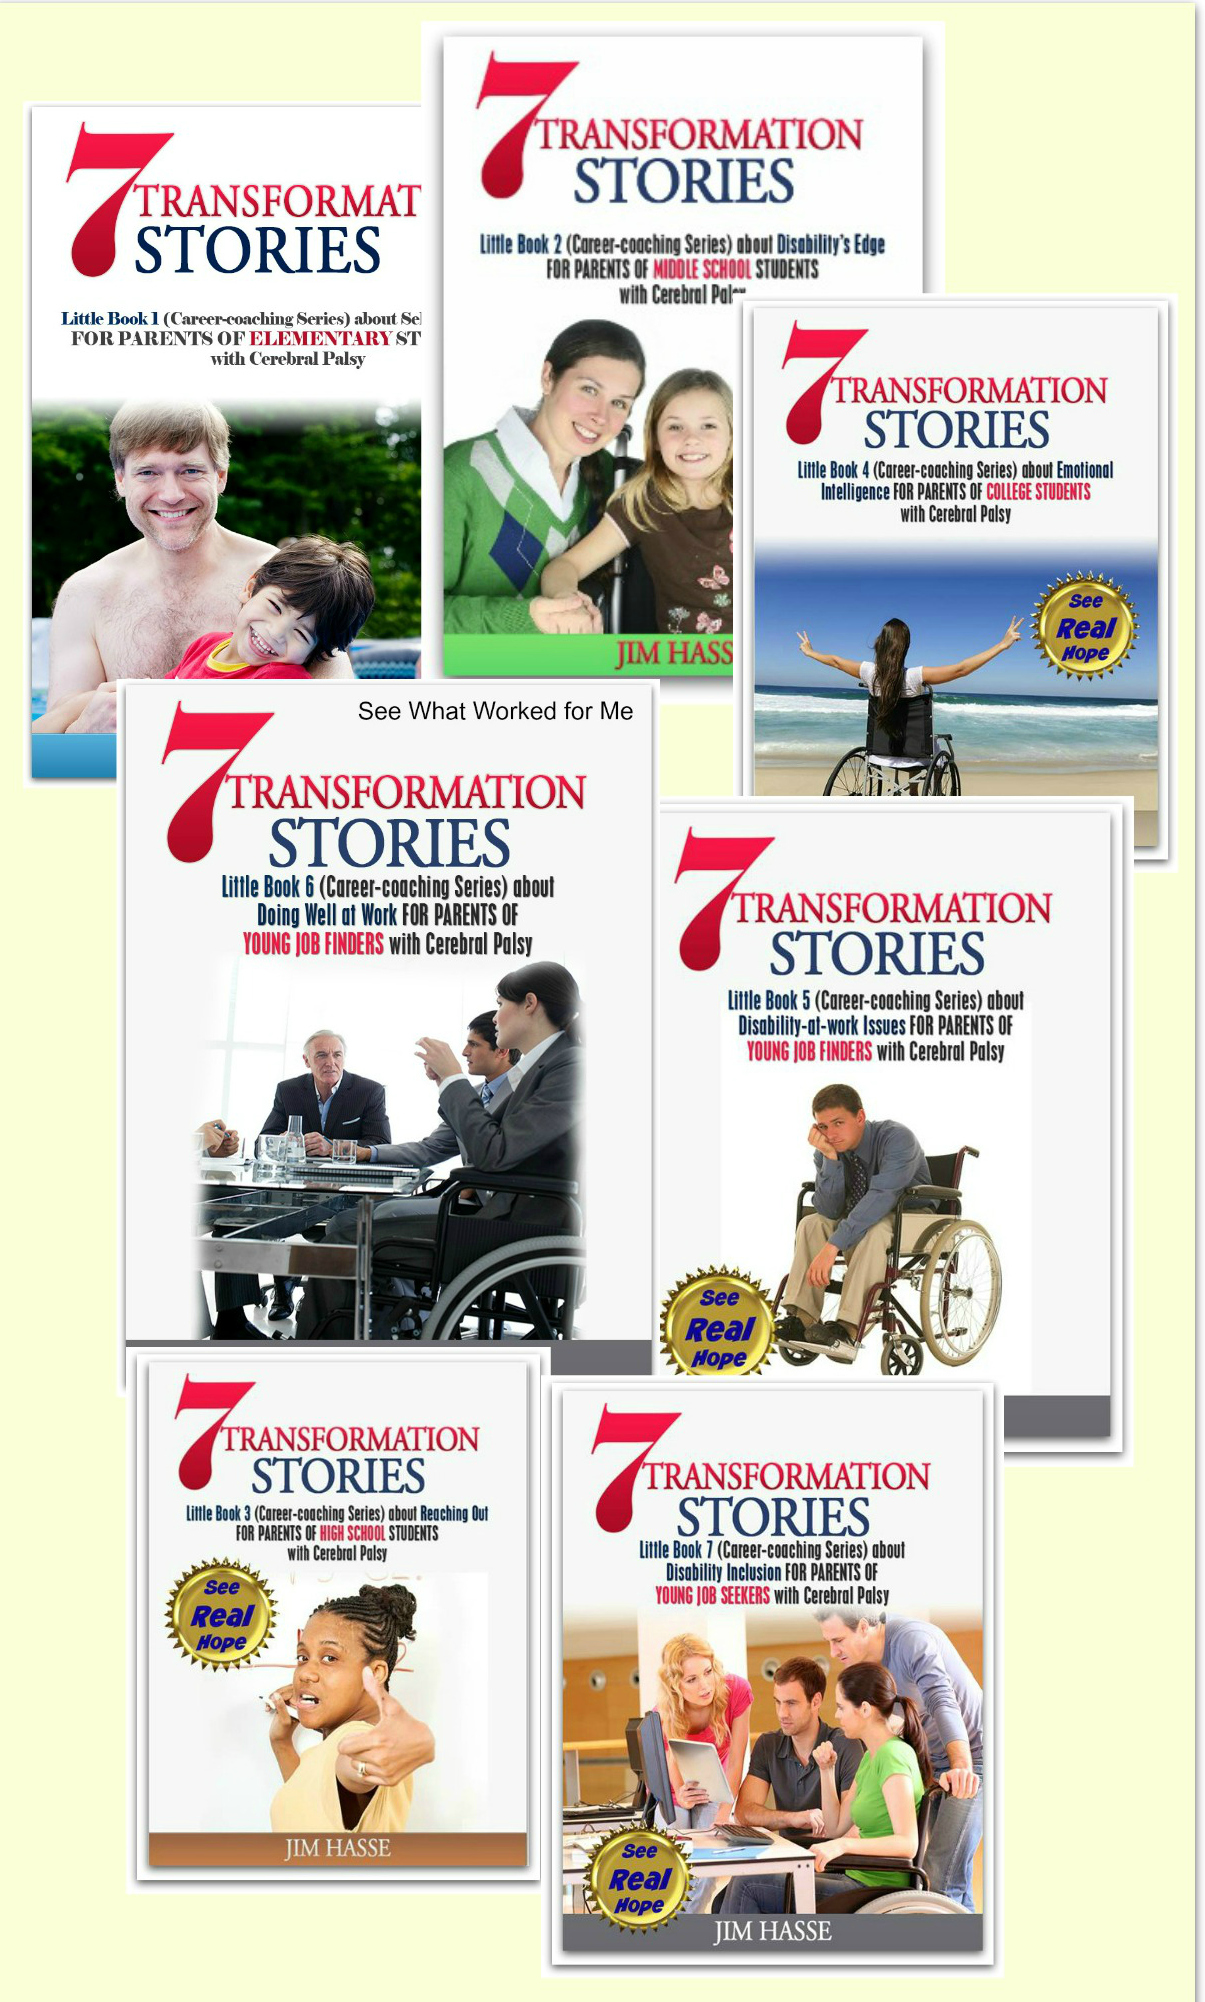 Covers of my seven "Transformation Stories" eBooks.